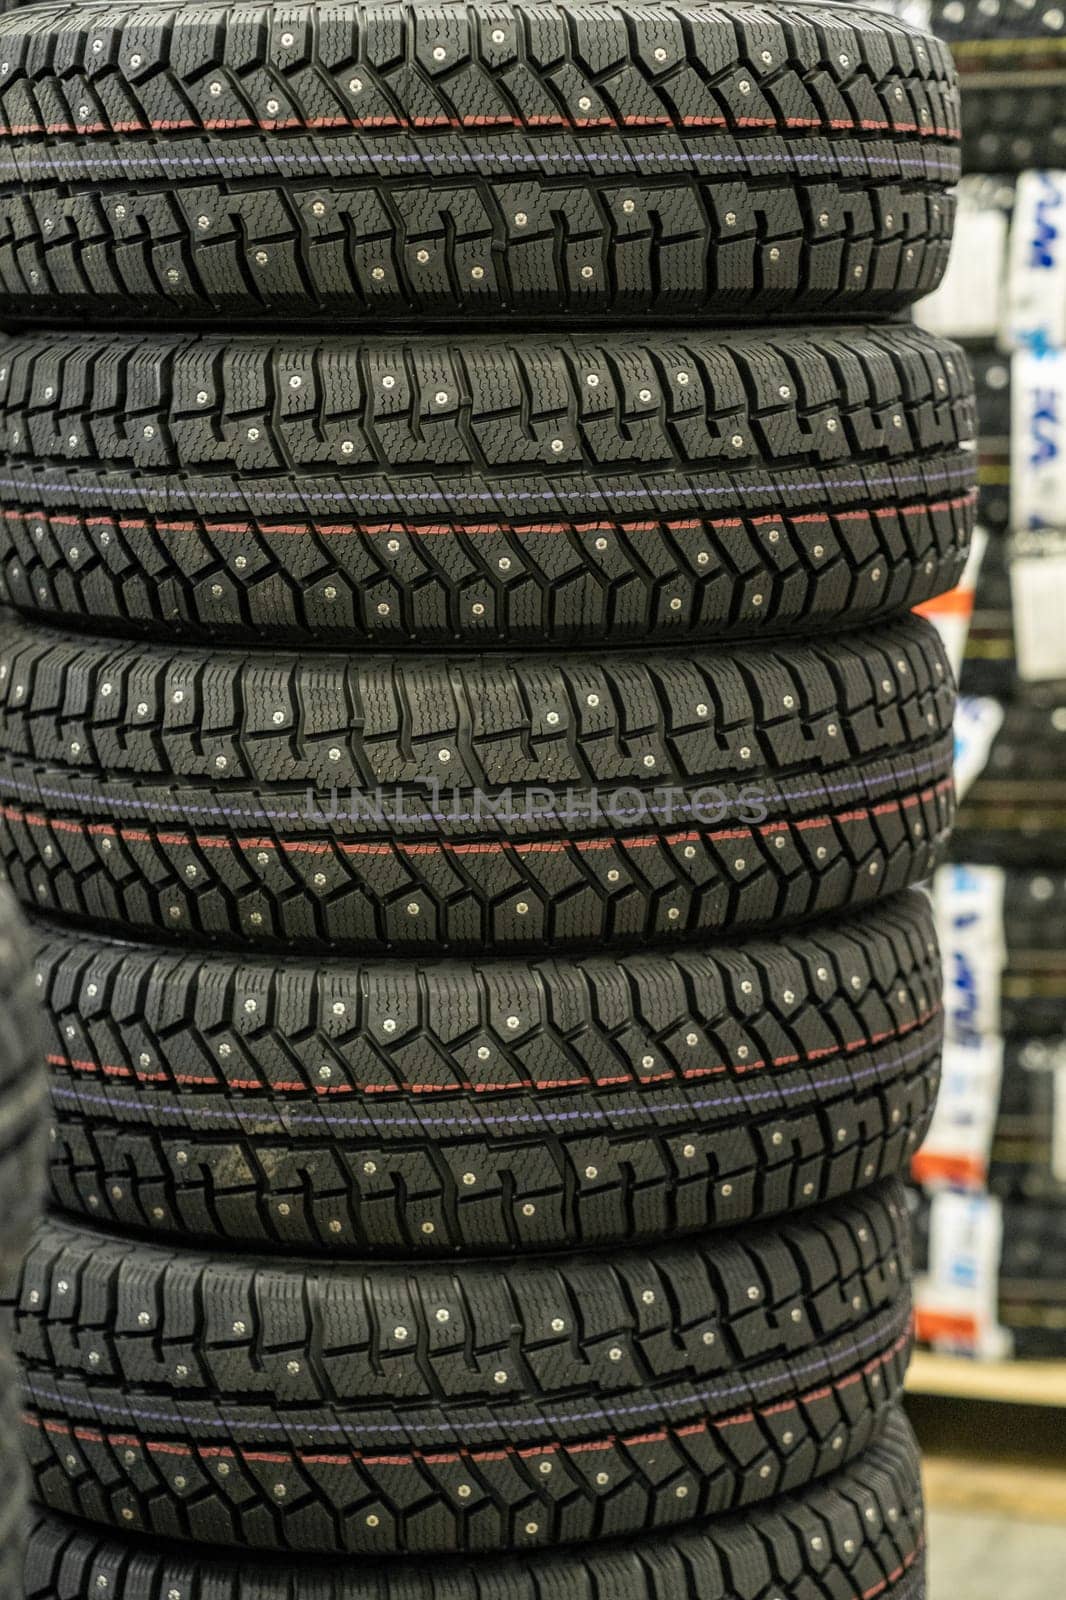 Sale of car tires for sale in the store. Many new winter tires lie by AnatoliiFoto